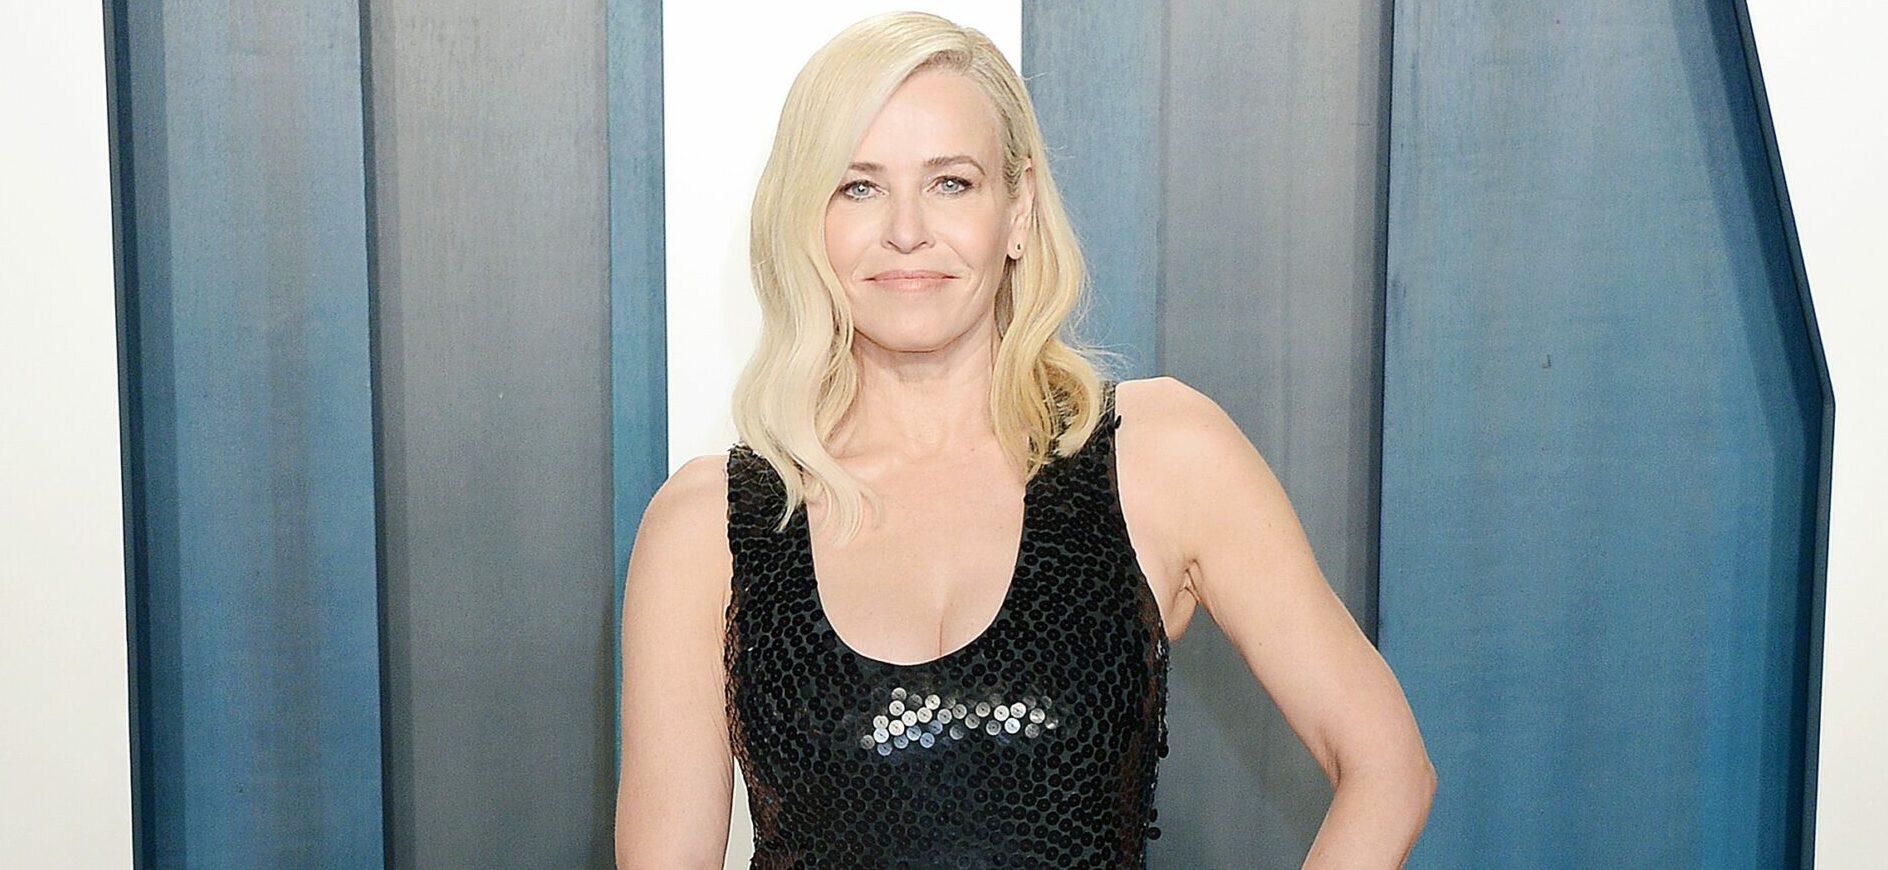 Chelsea Handler Shares PDA-Packed Photo With Jo Koy As Their Go Instagram Official